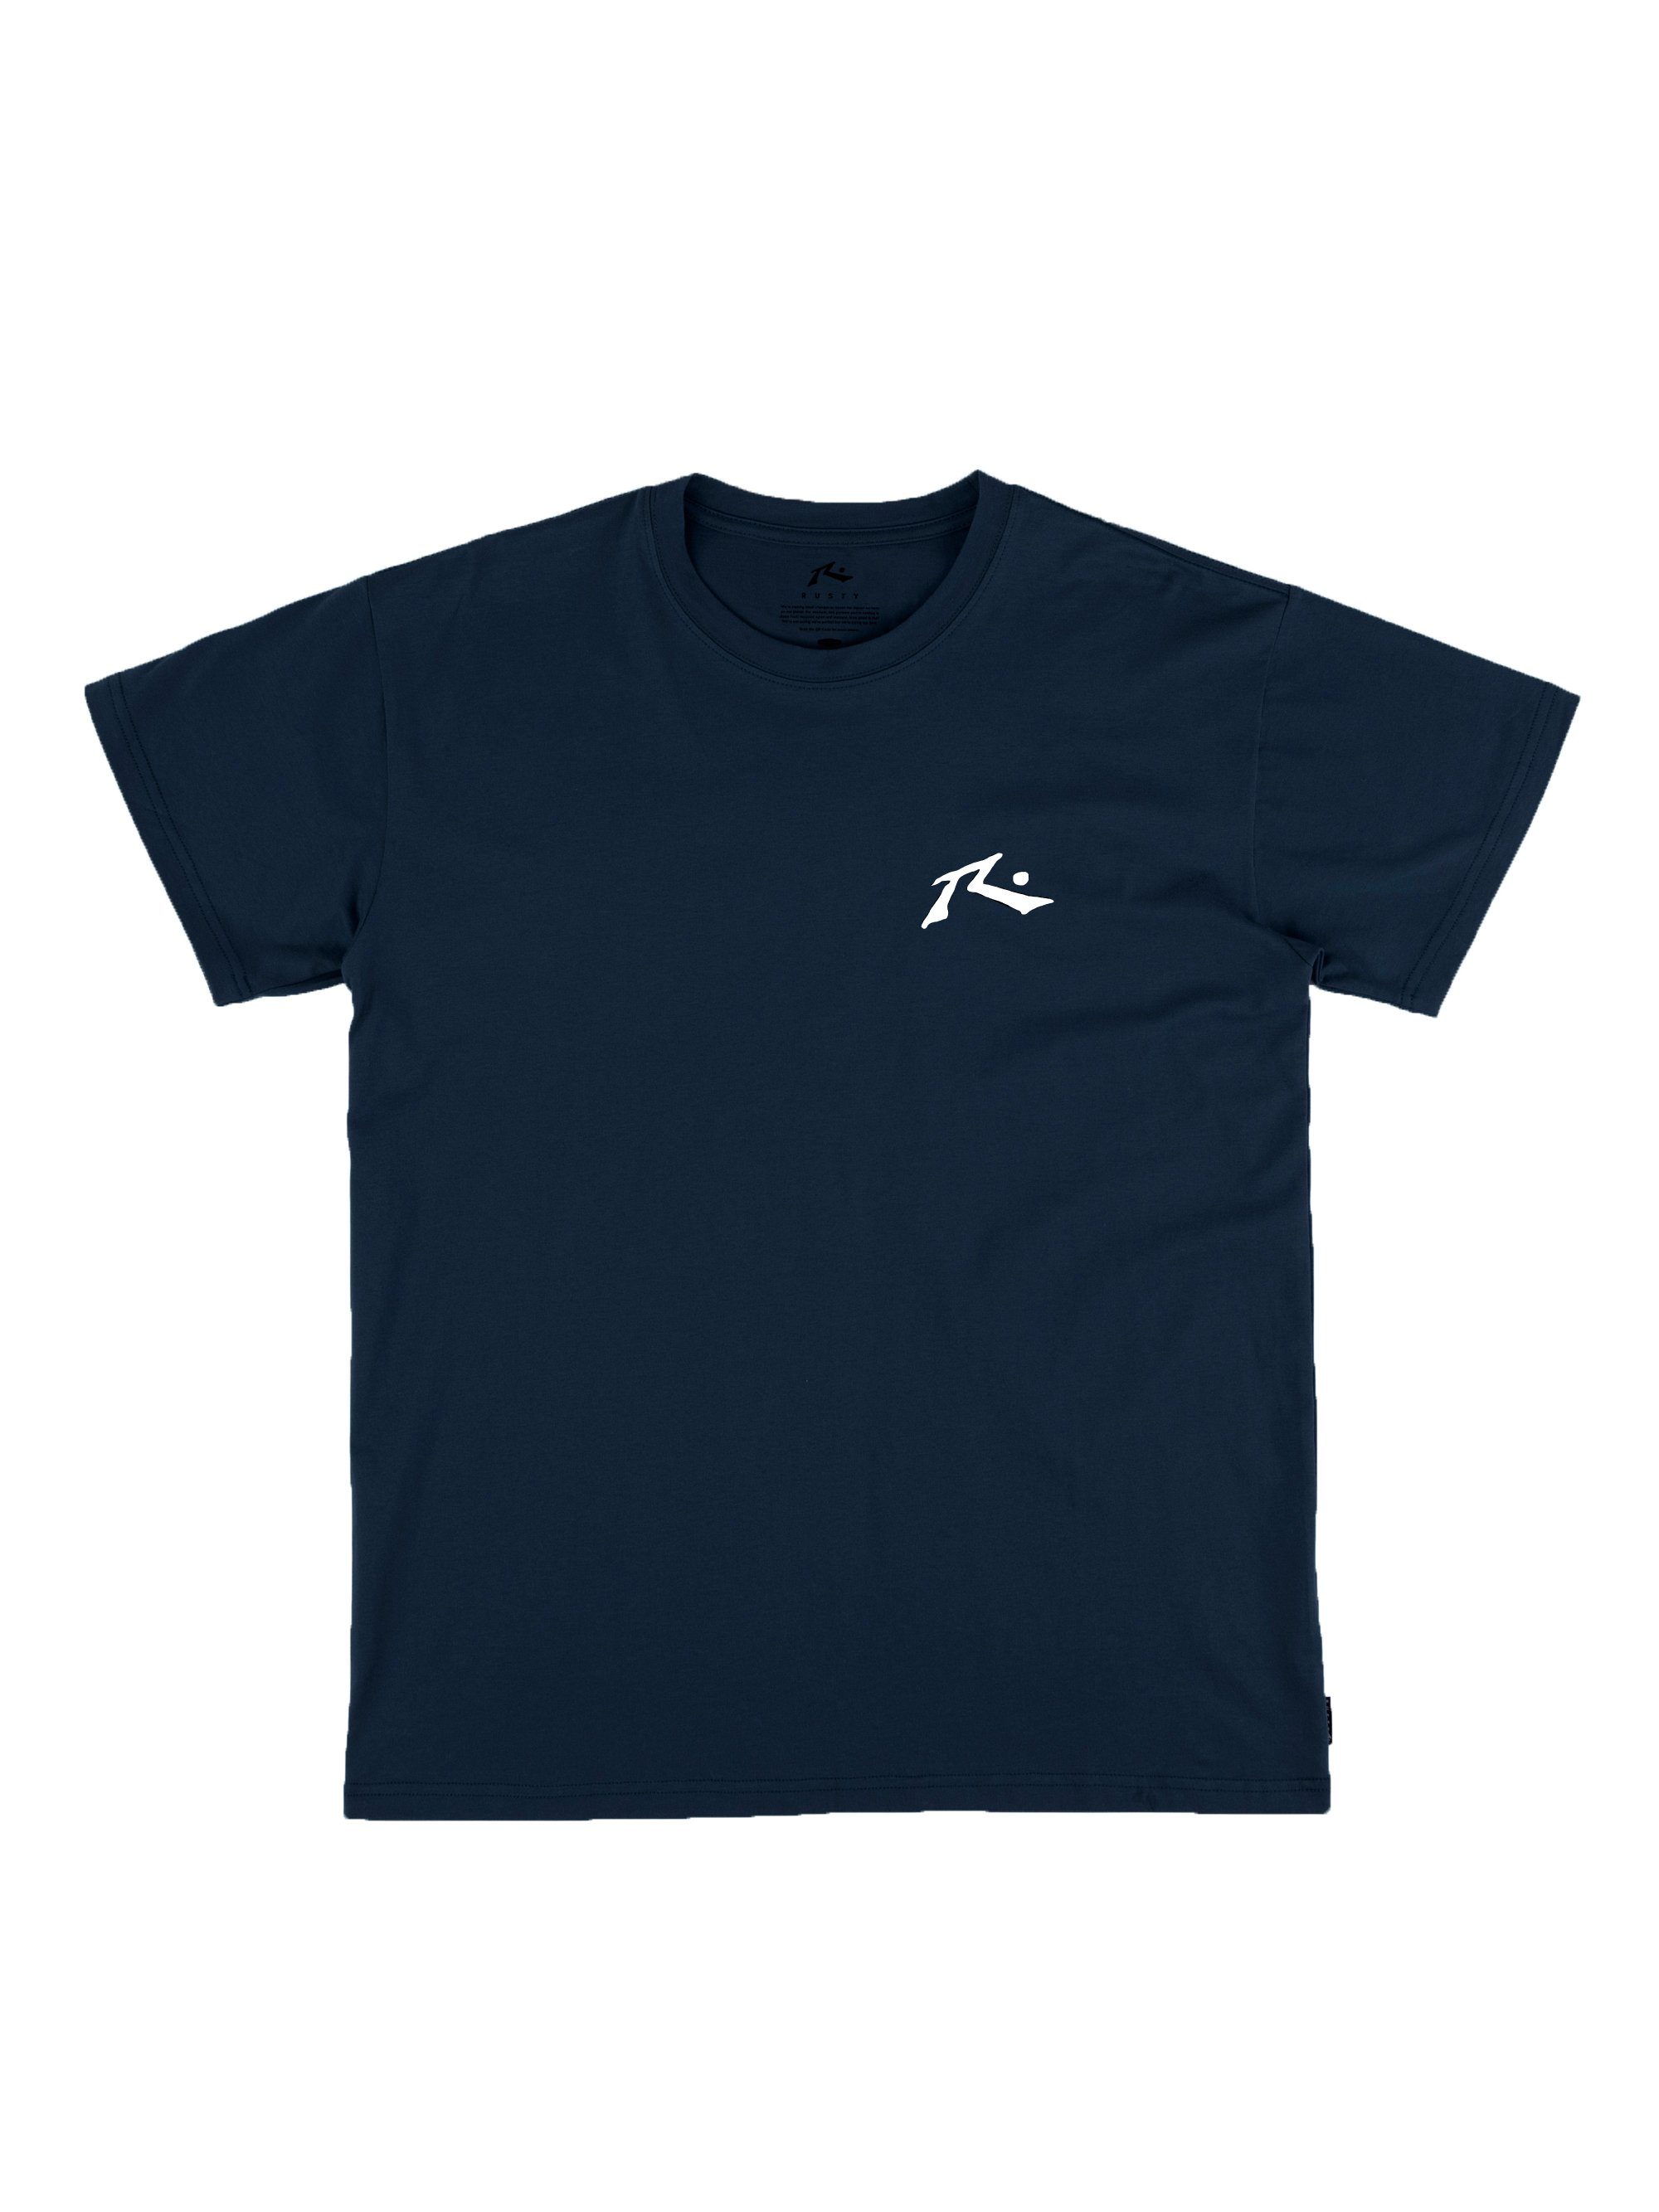 Rusty T-Shirt COMPETITION SHORT SLEEVE TEE Navy Blue